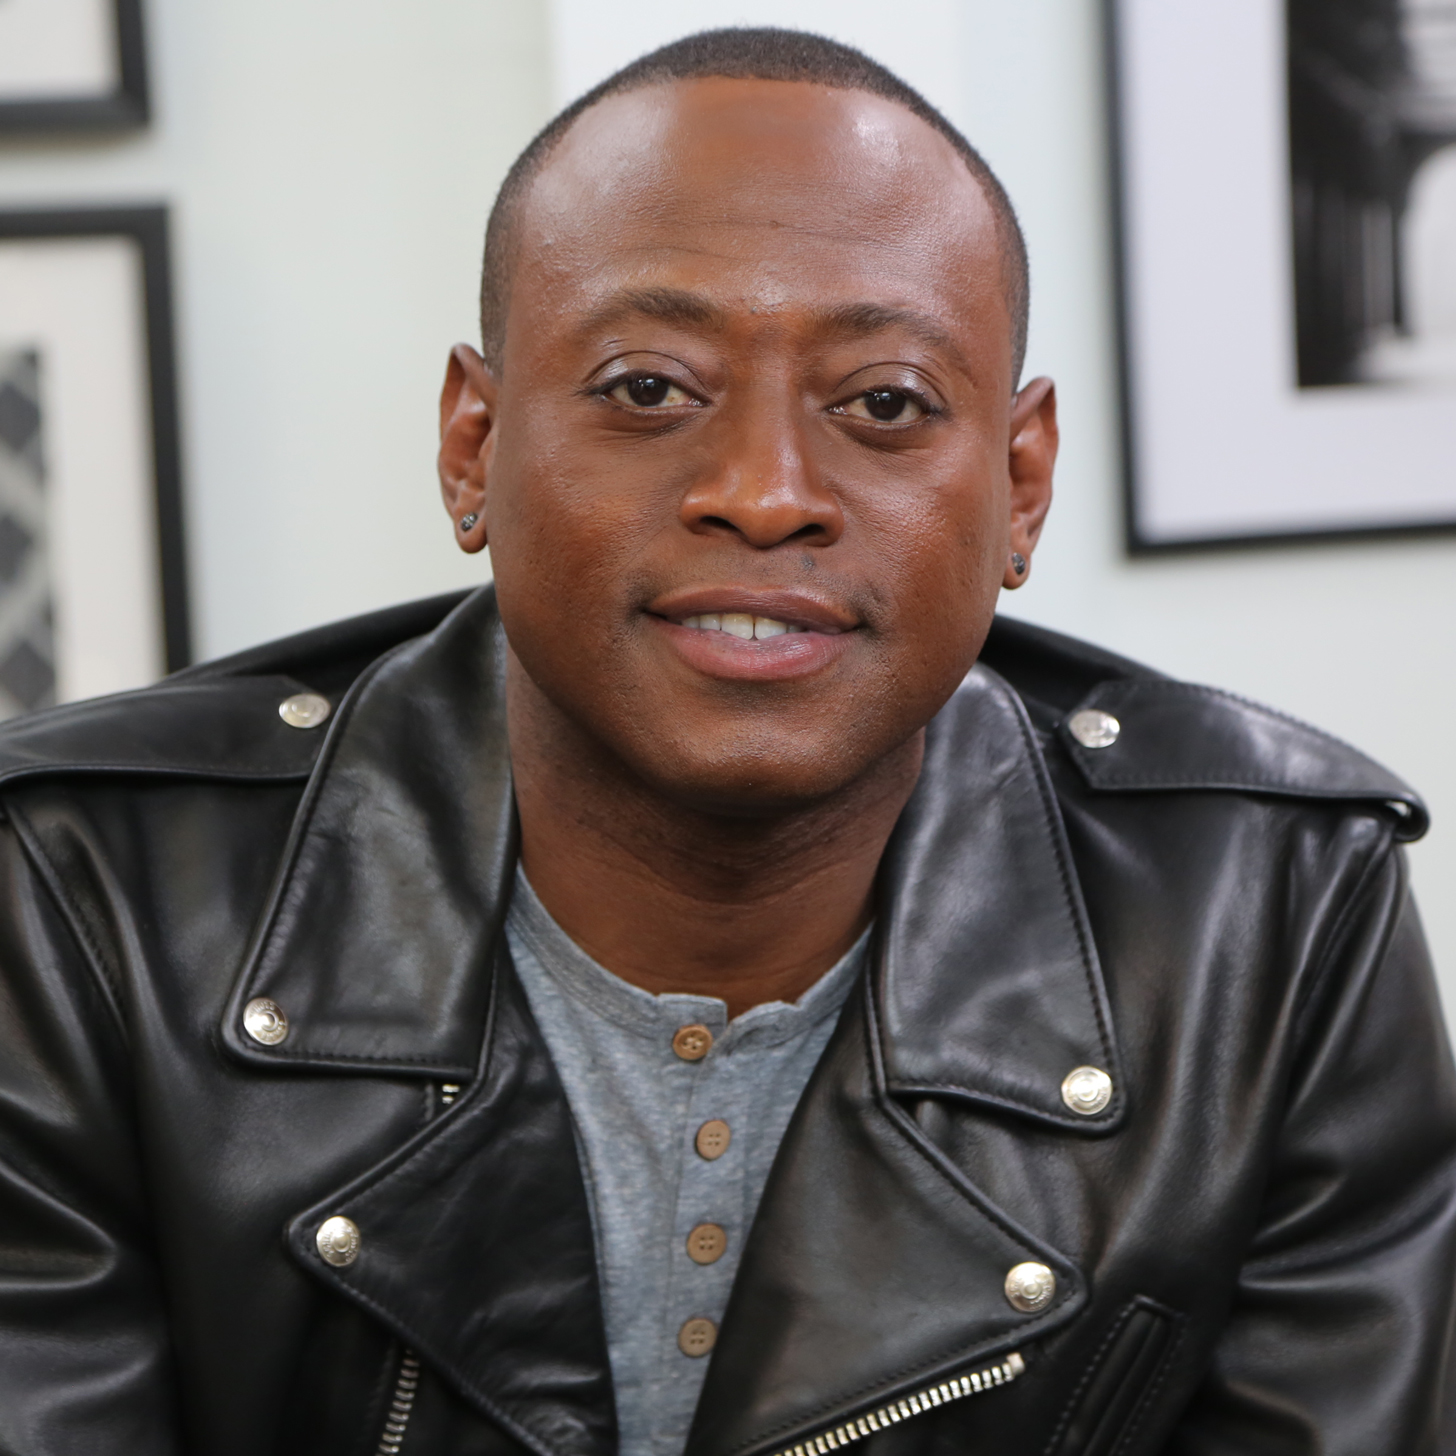 More Pictures Of Omar Epps. omar epps images. 